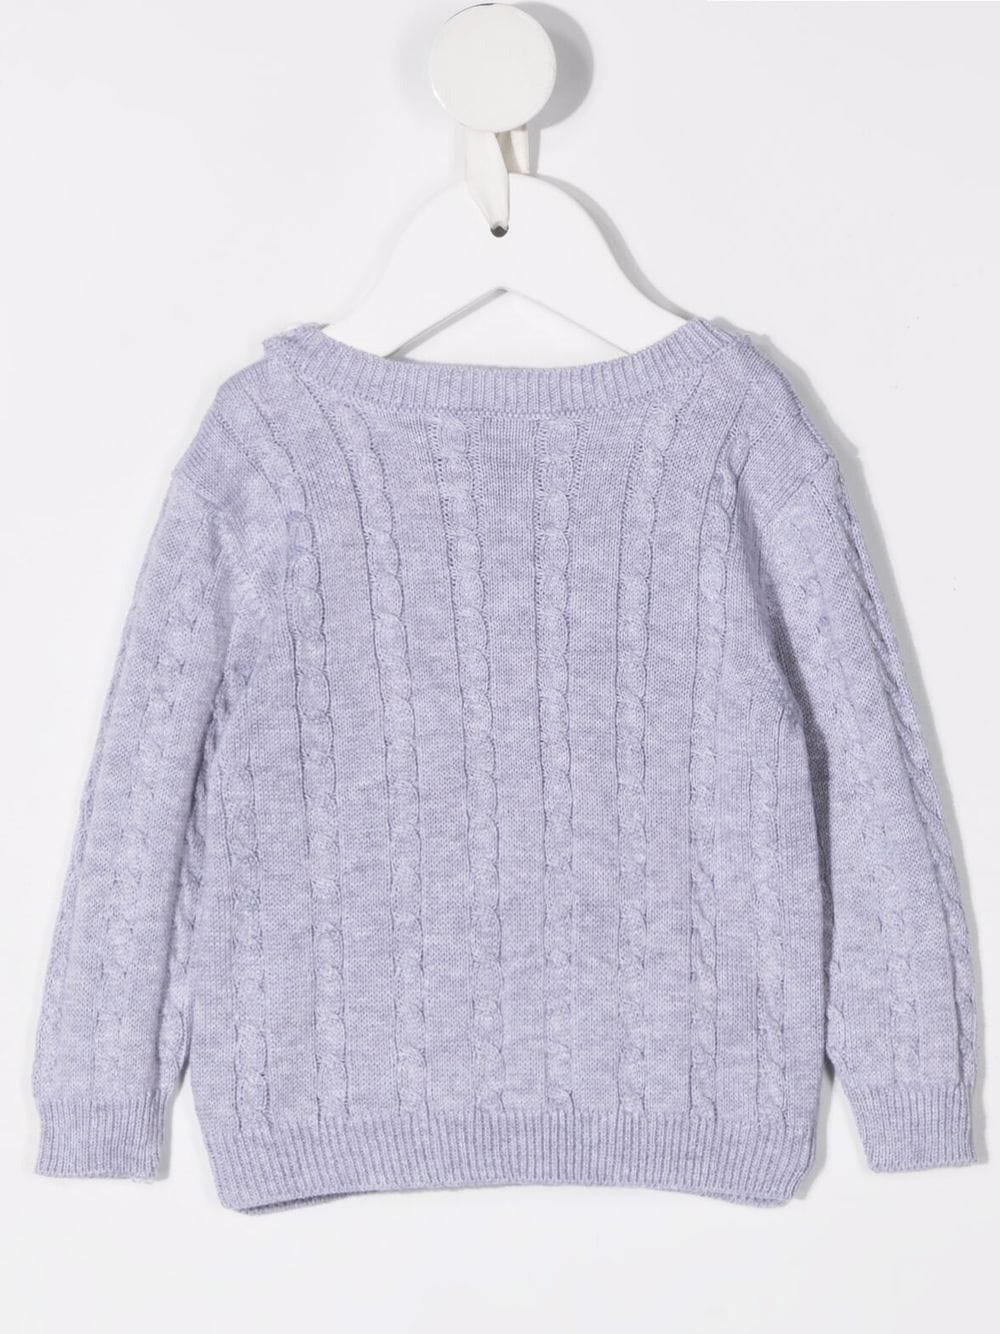 Image 2 of Siola cable-knit cotton jumper